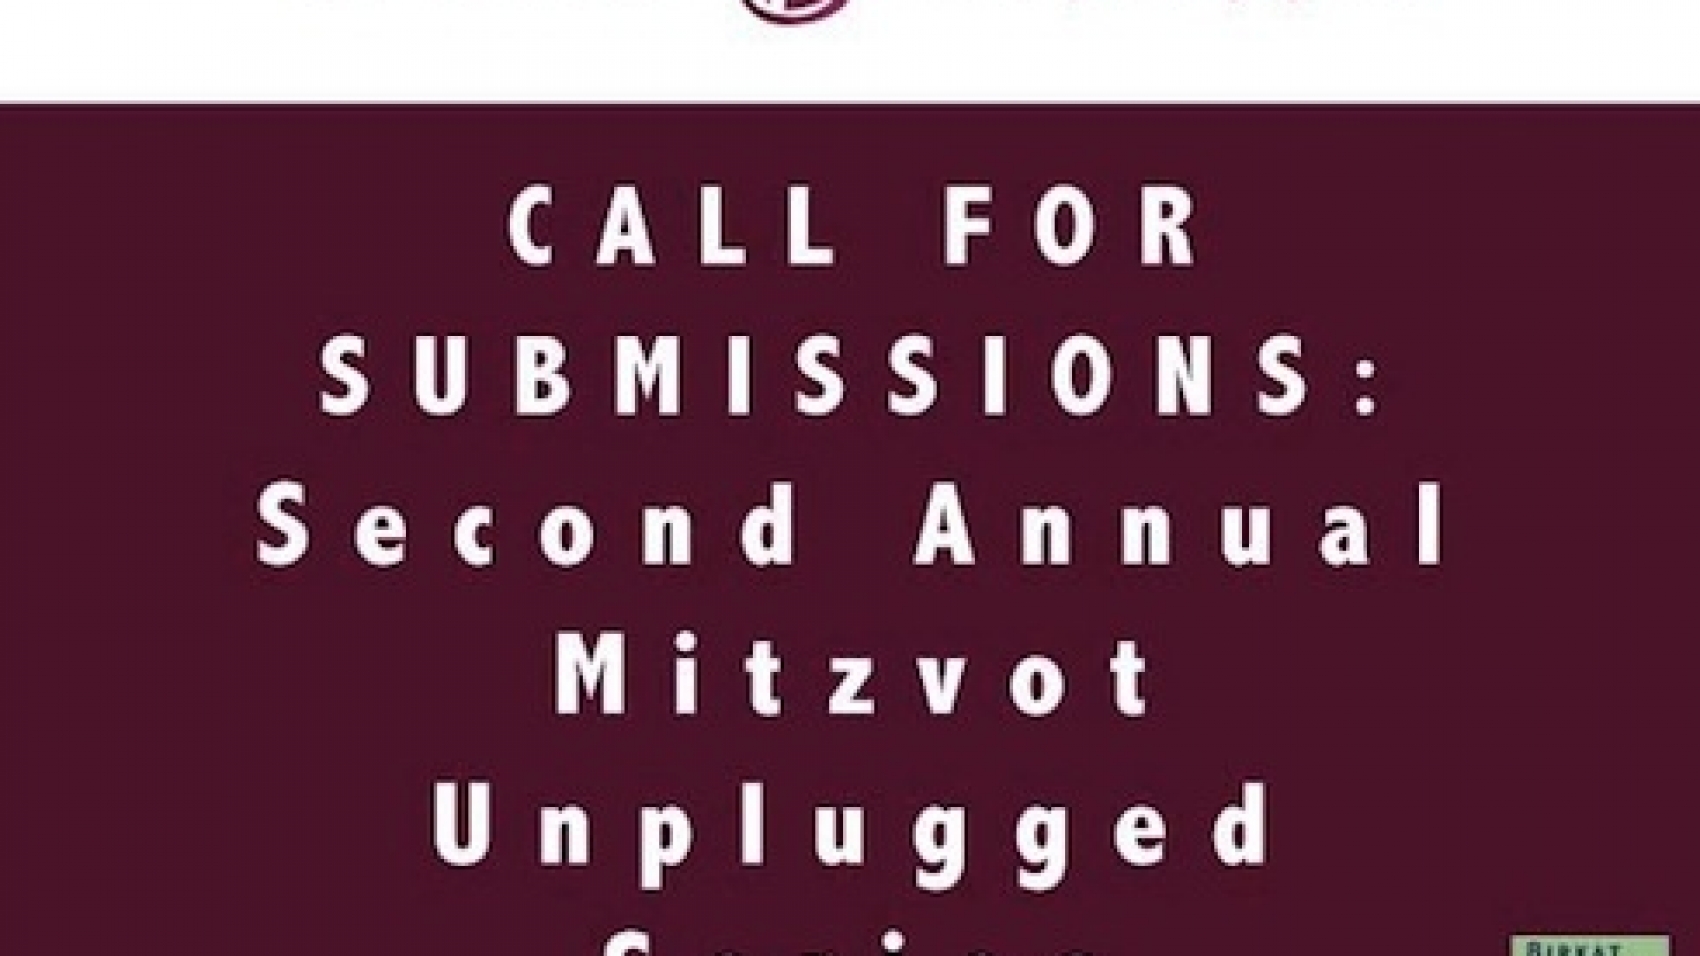 call for submissions to the mitzvot unplugged series about teaching our kids mitzvot creatively.see post for more details.